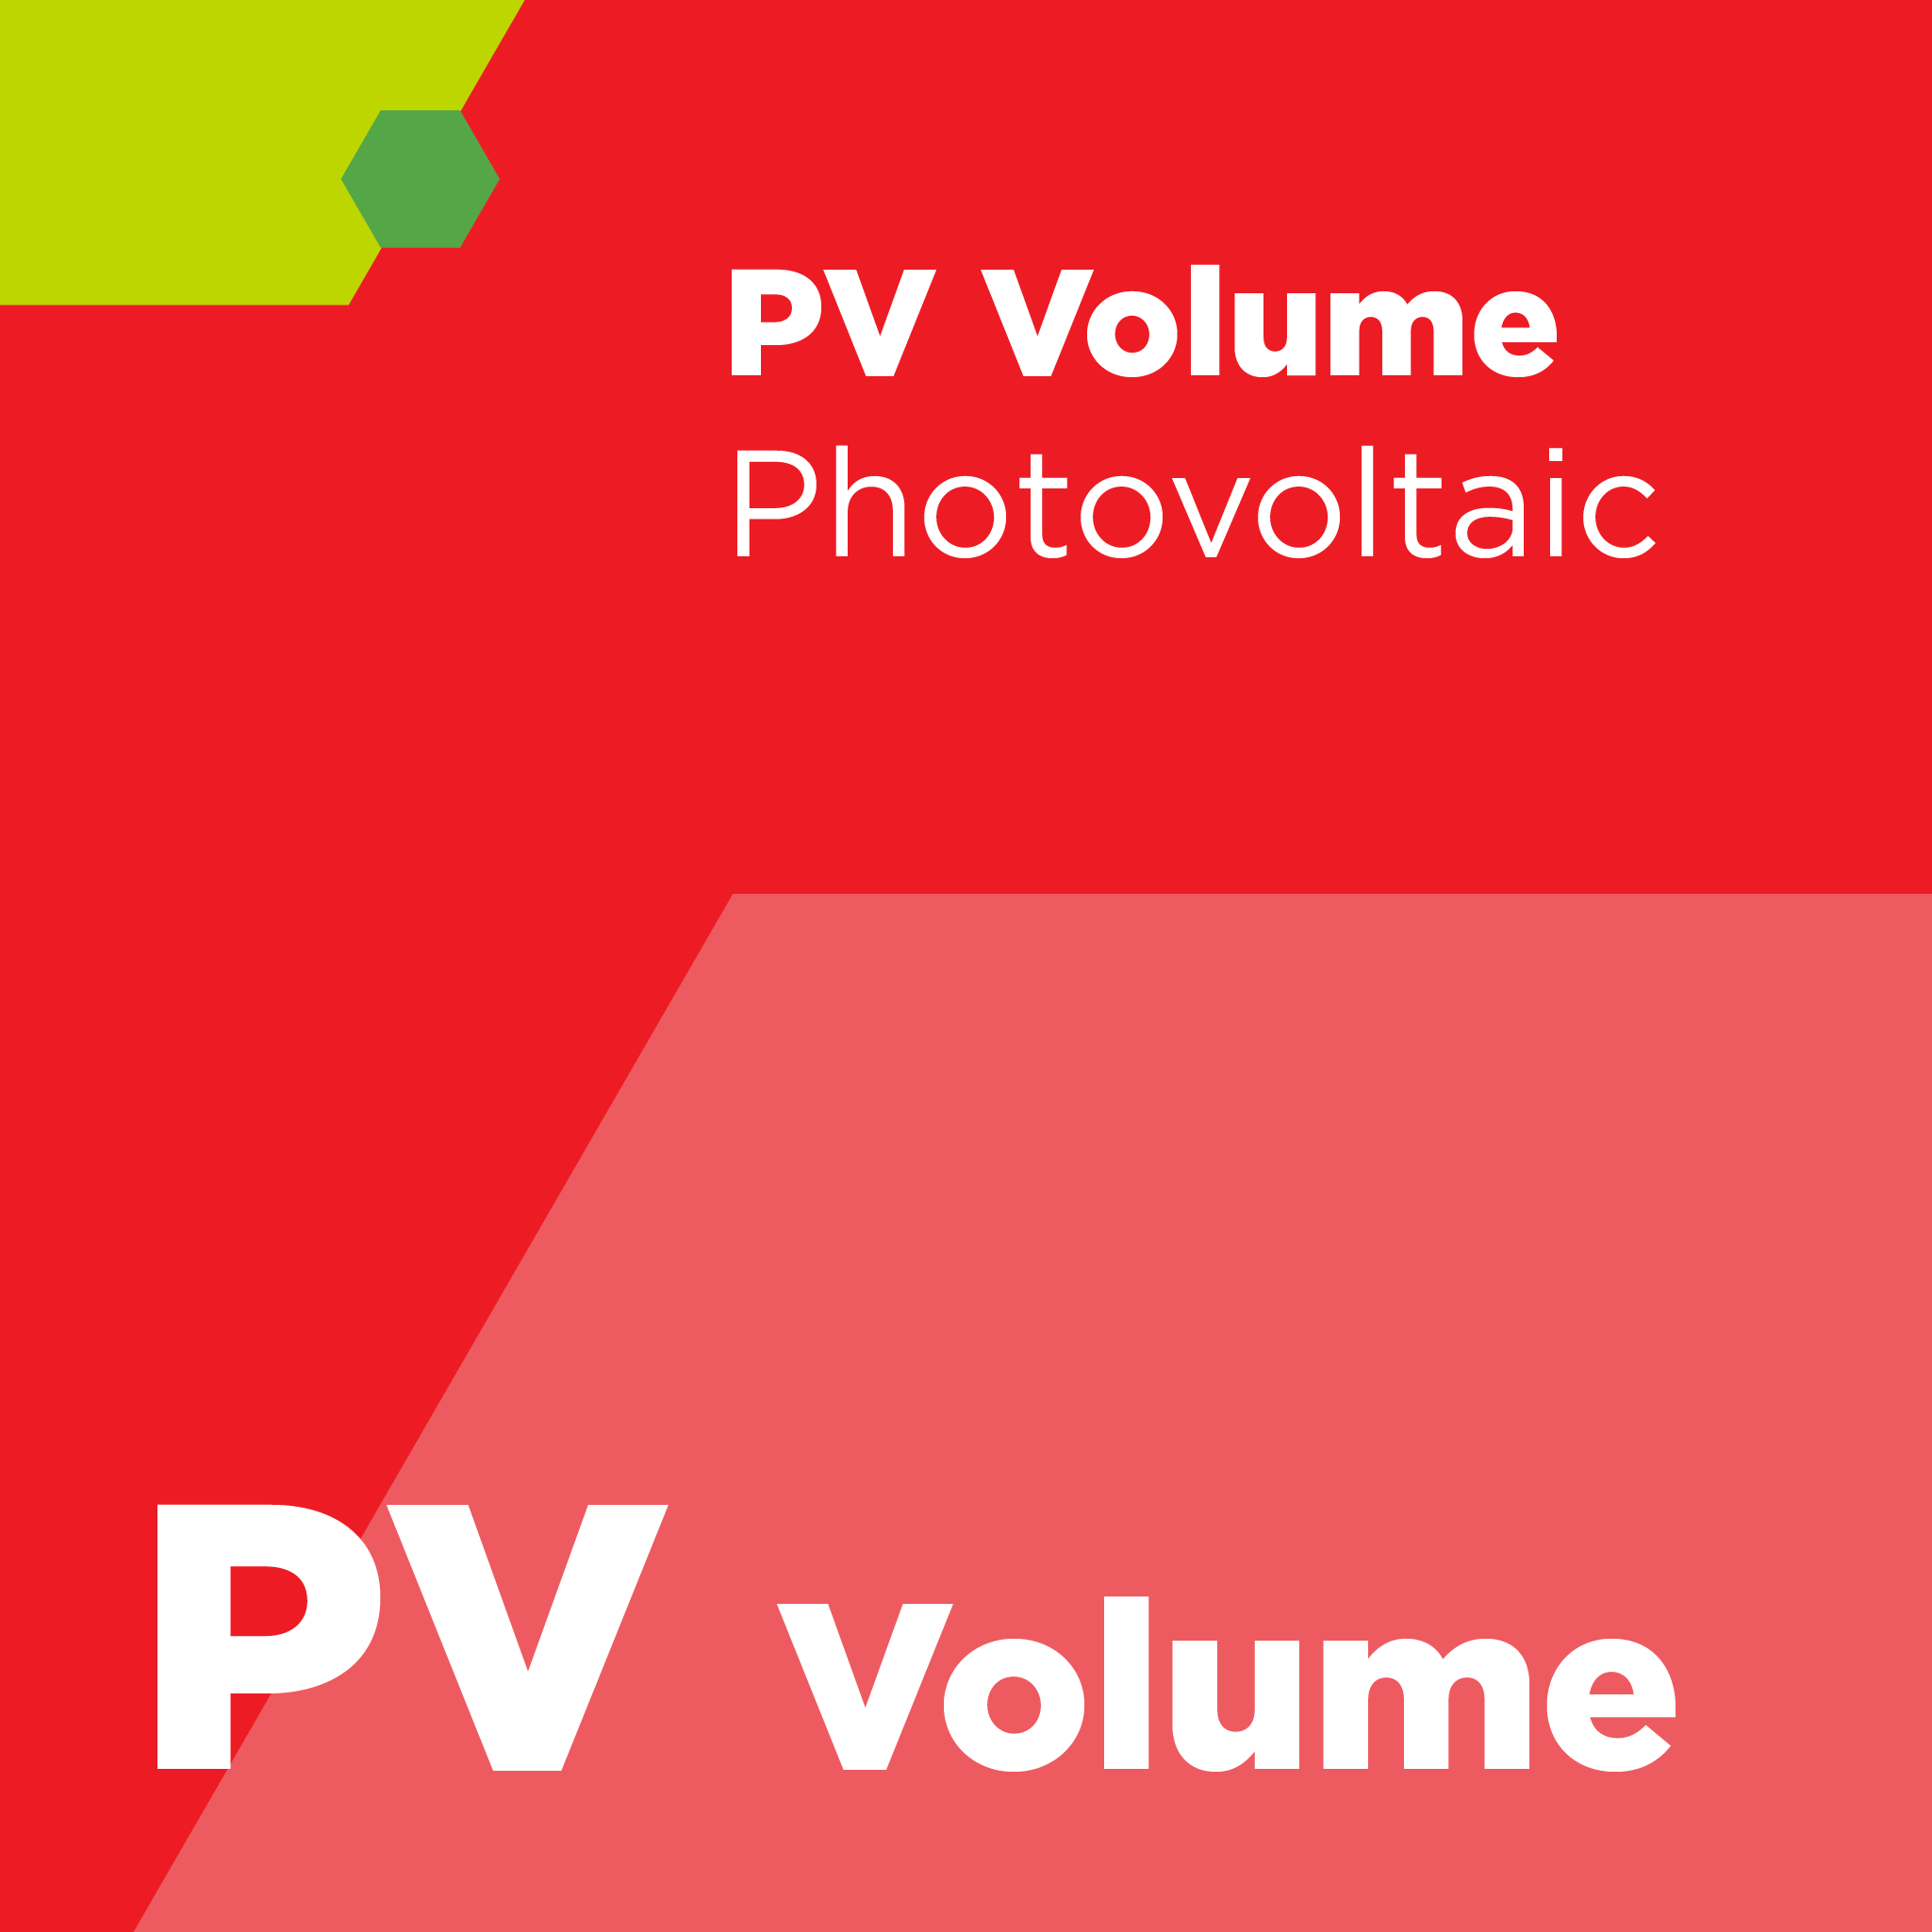 PV01400 - SEMI PV14 - Guide for Phosphorus Oxychloride, Used in Photovoltaic Applications